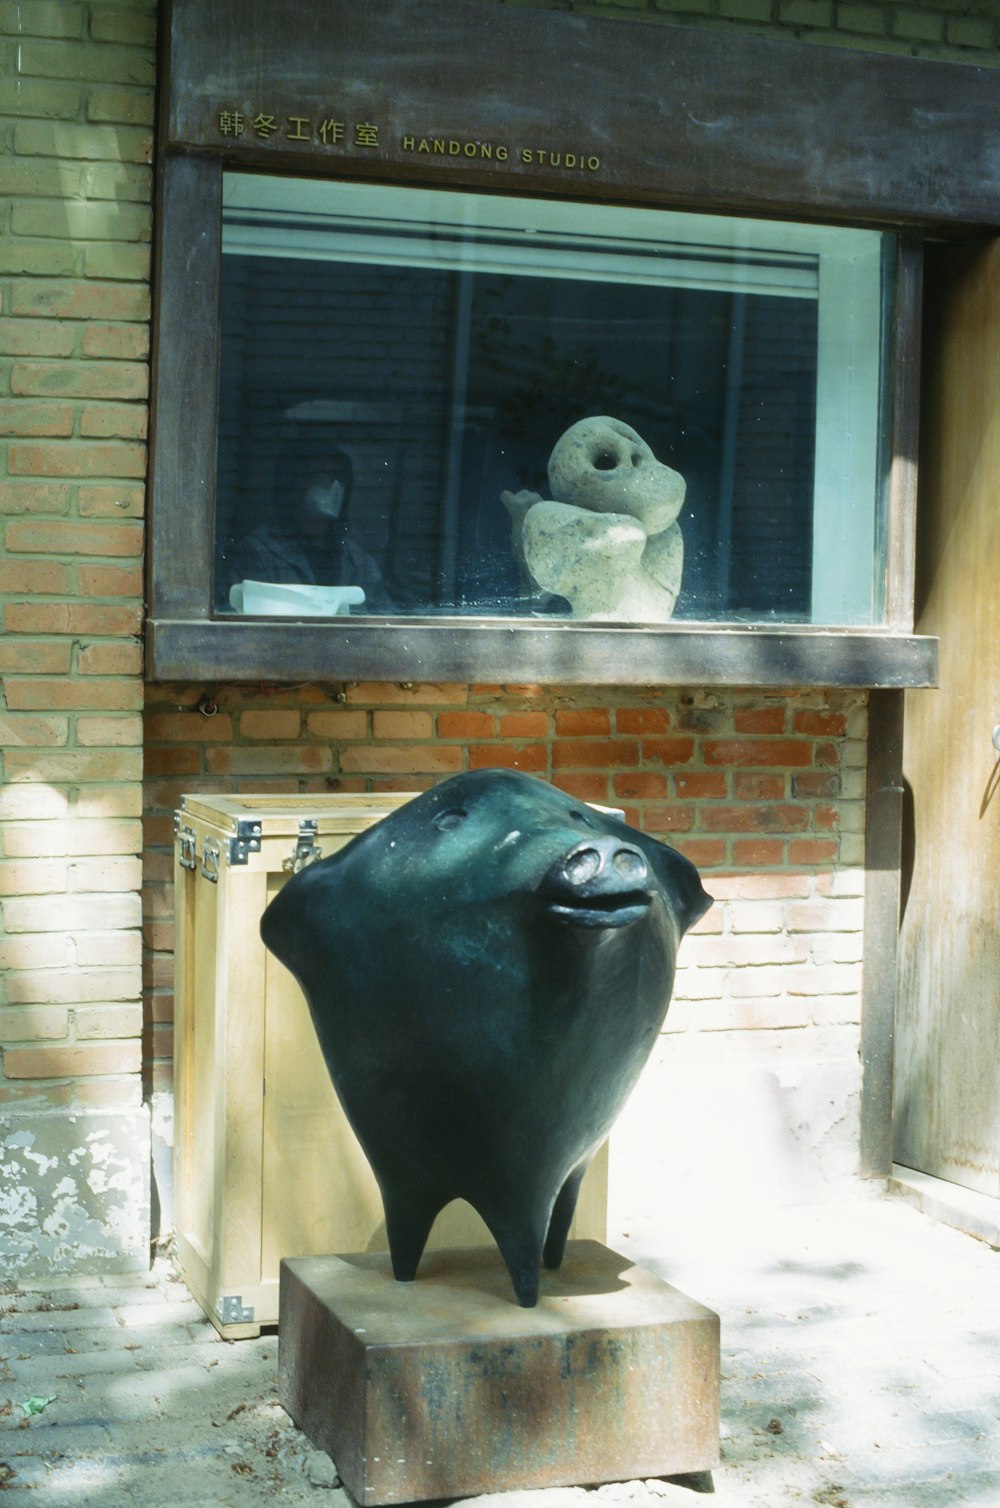 a sculpture of a fish in front of a window